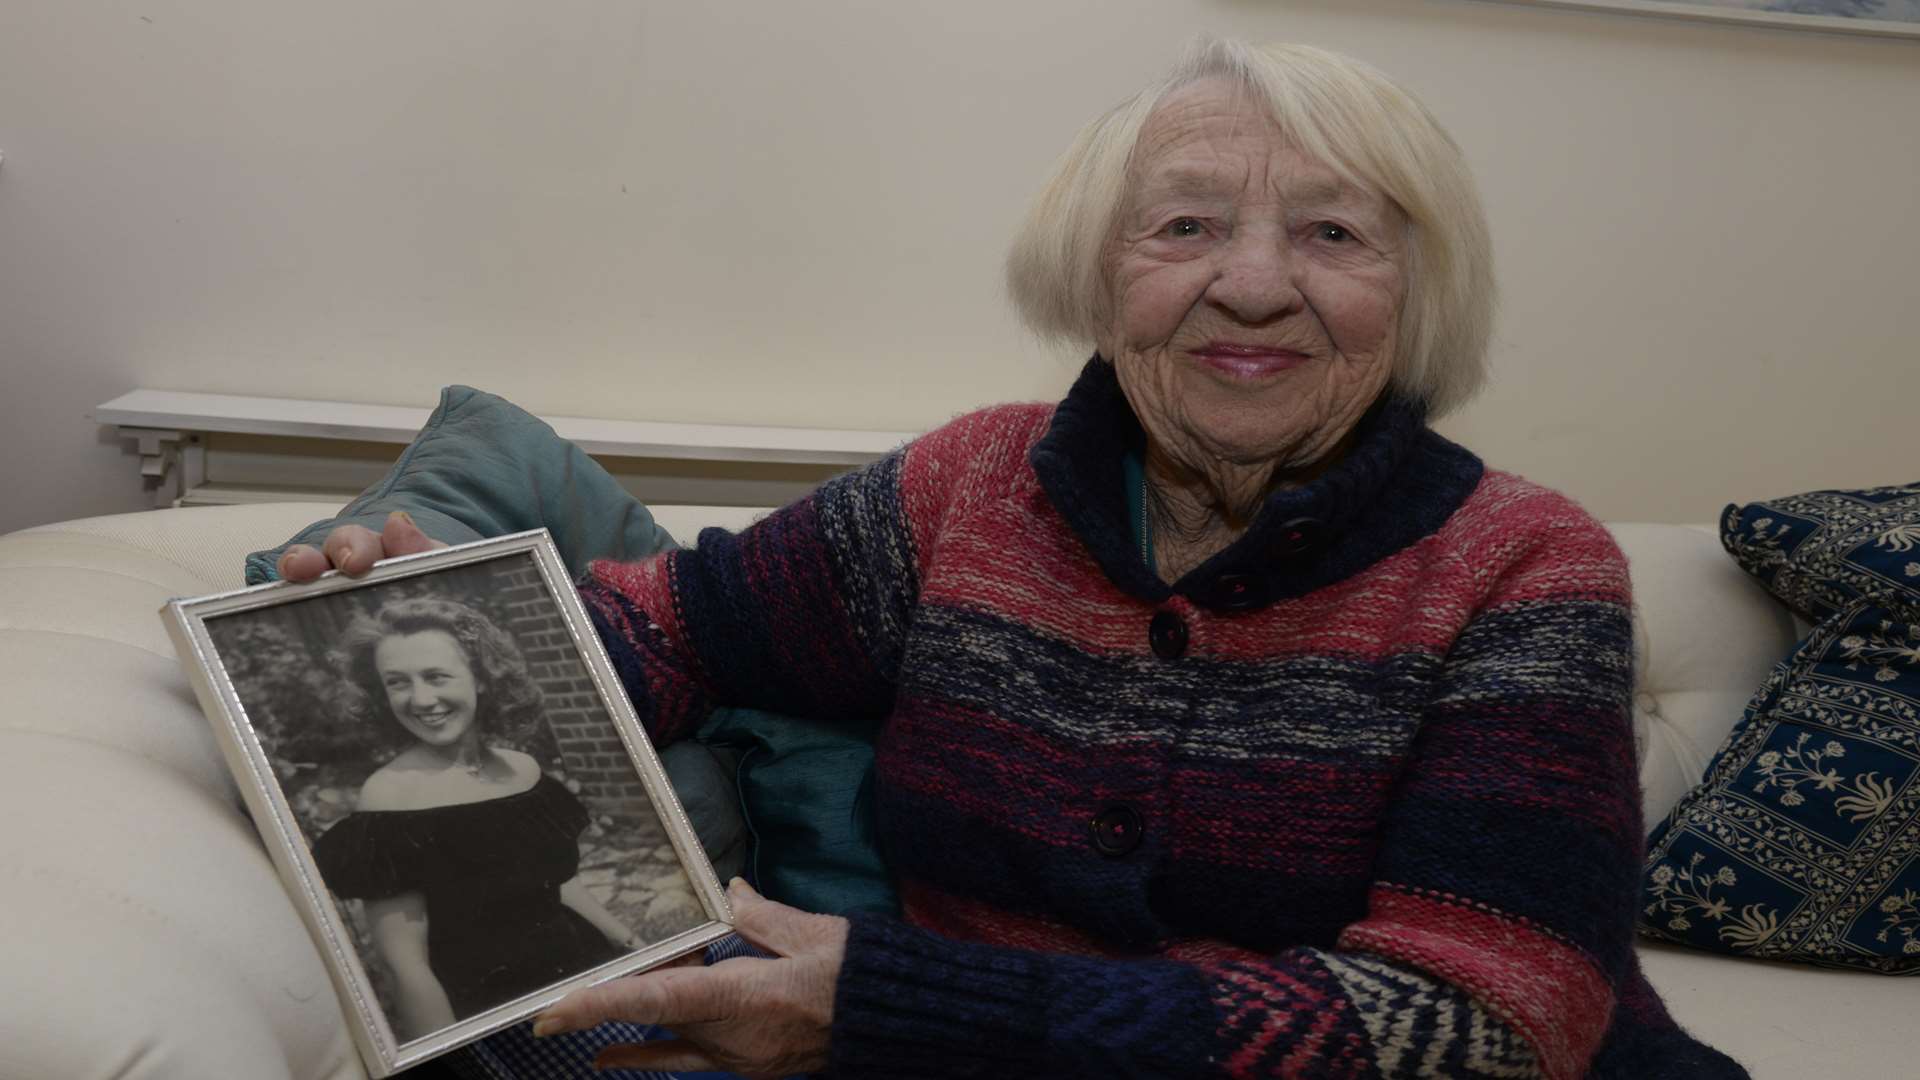 Clara now, aged 92, holding a picture of herself taken 70 years ago